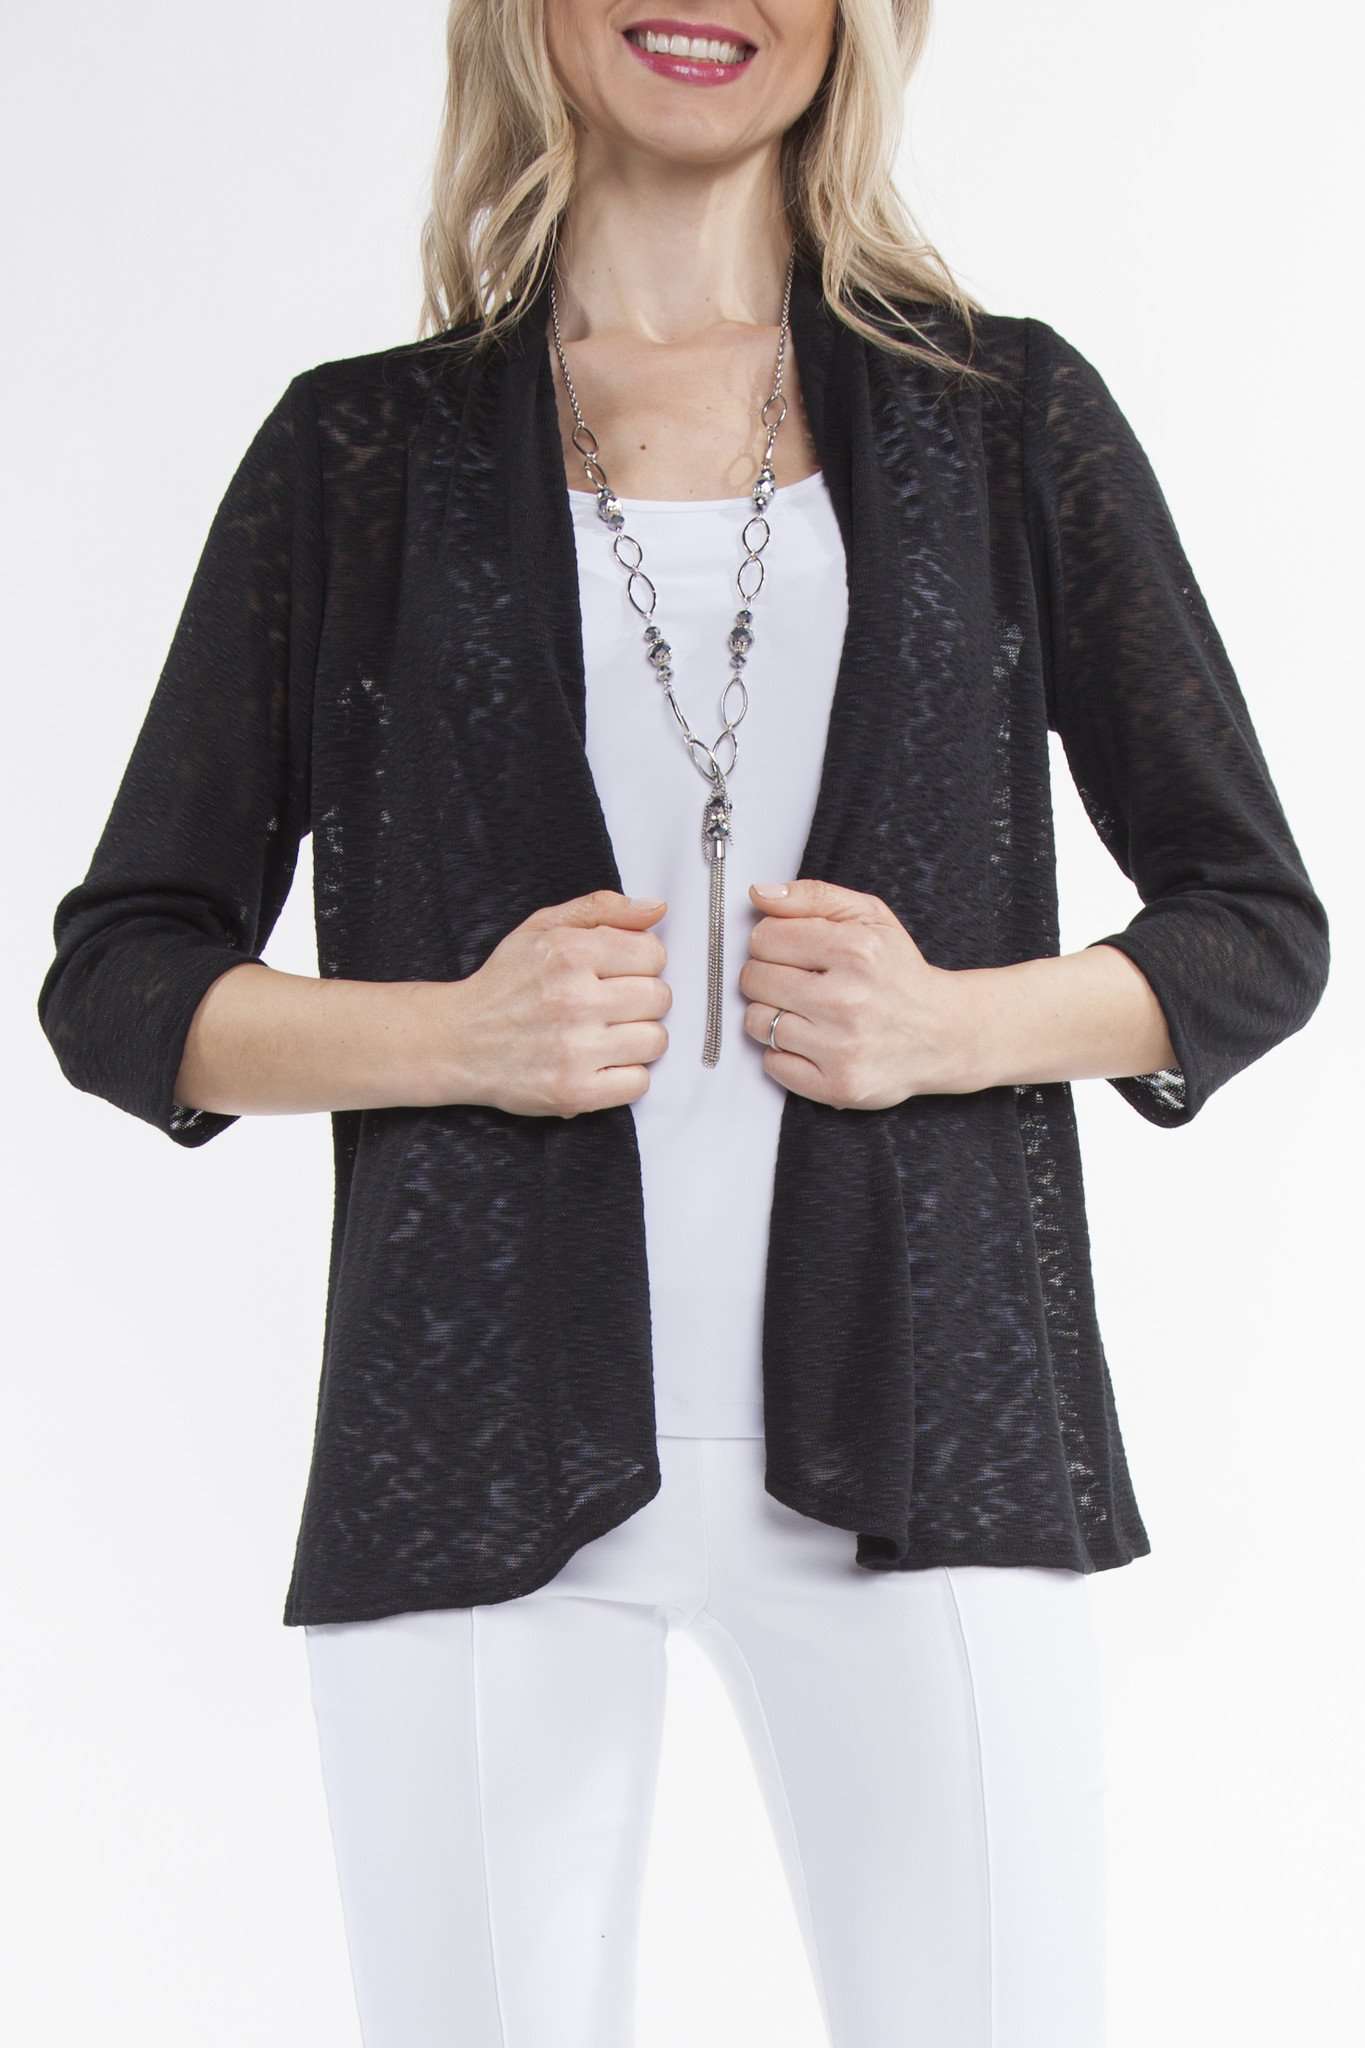 Women's Cardigan Black Cover up Jacket On Sale Quality Fabric Amazing Fit Our best Seller Made In Canada Shop Yvonne Marie Boutiques Over 30 Years Loyal Clients - Yvonne Marie - Yvonne Marie